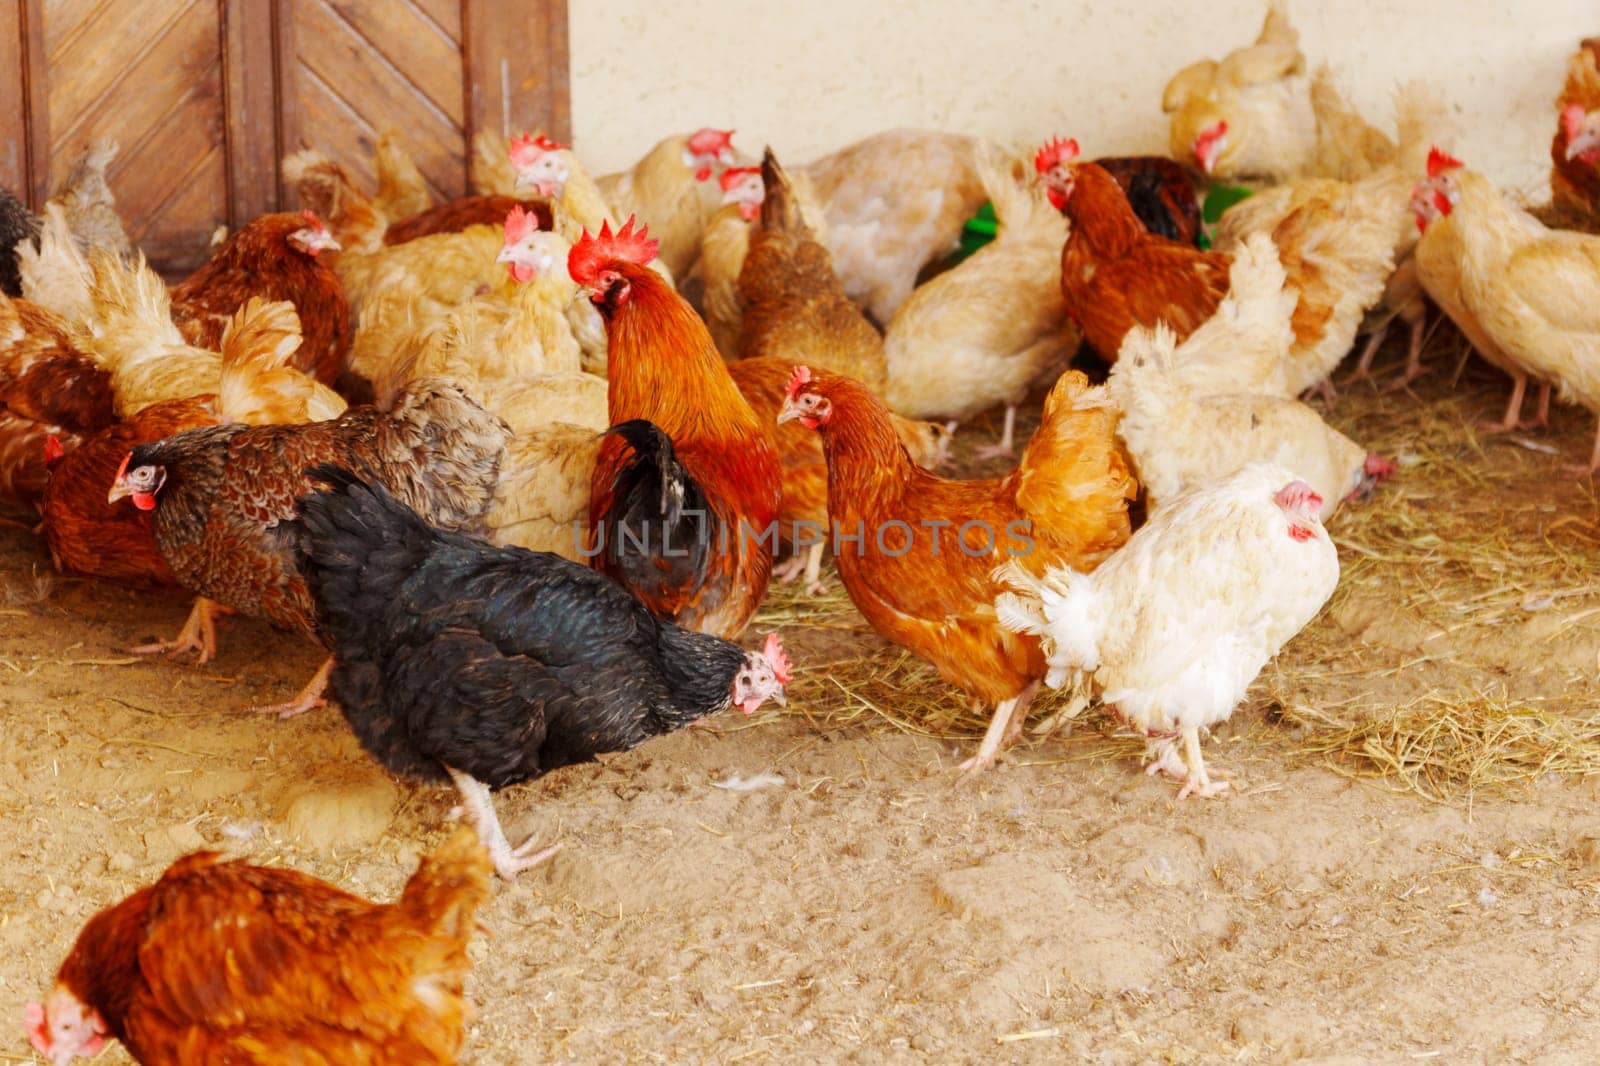 Chickens, their feathers ruffling in the wind as they survey their surroundings and peck at the ground.